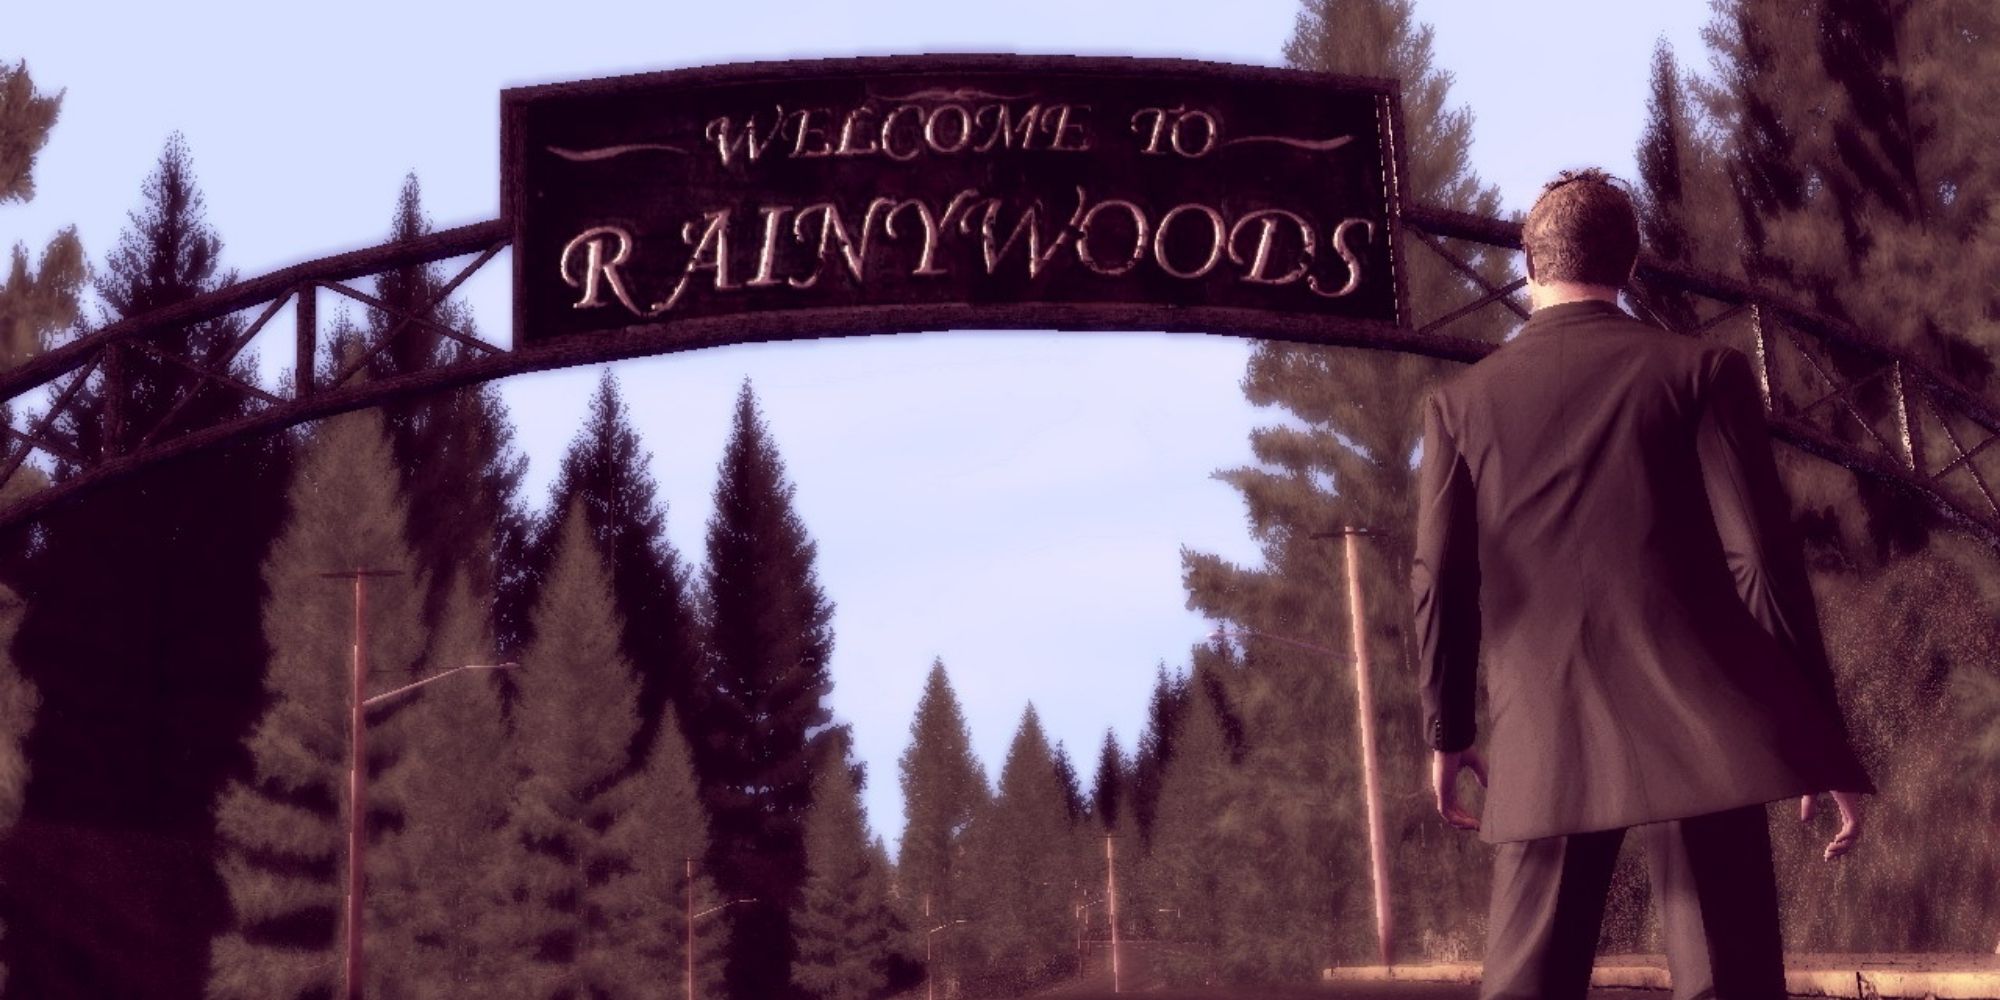 Deadly Premonition's main character, Detective Francis York Morgan, looks at a sign that reads "Welcome to Rainy Woods"